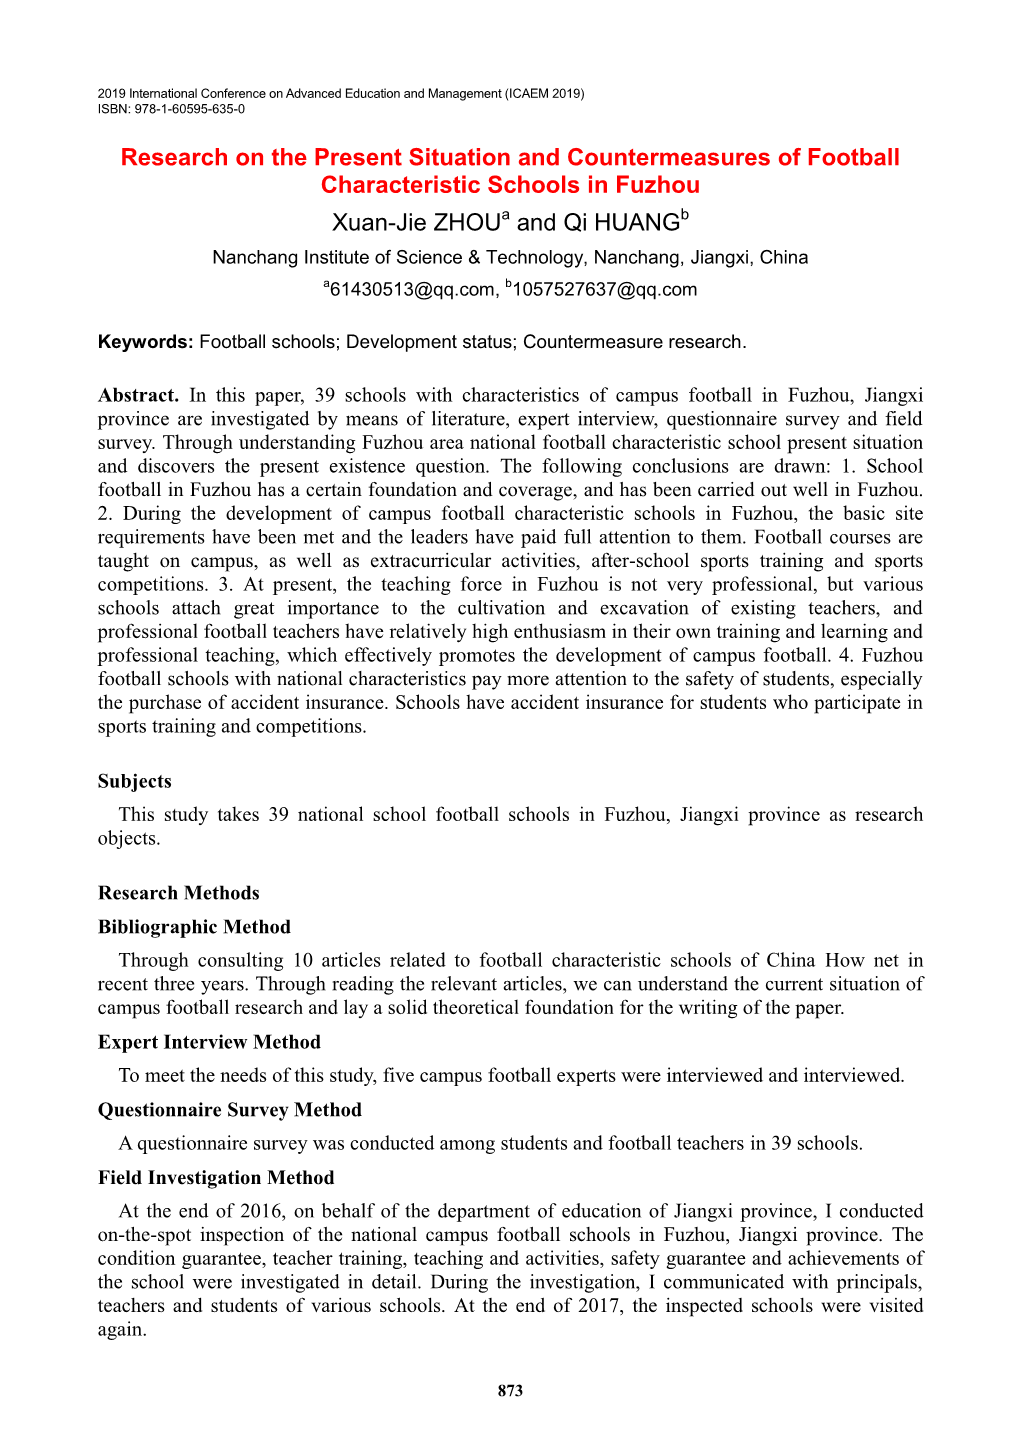 Research on the Present Situation and Countermeasures of Football